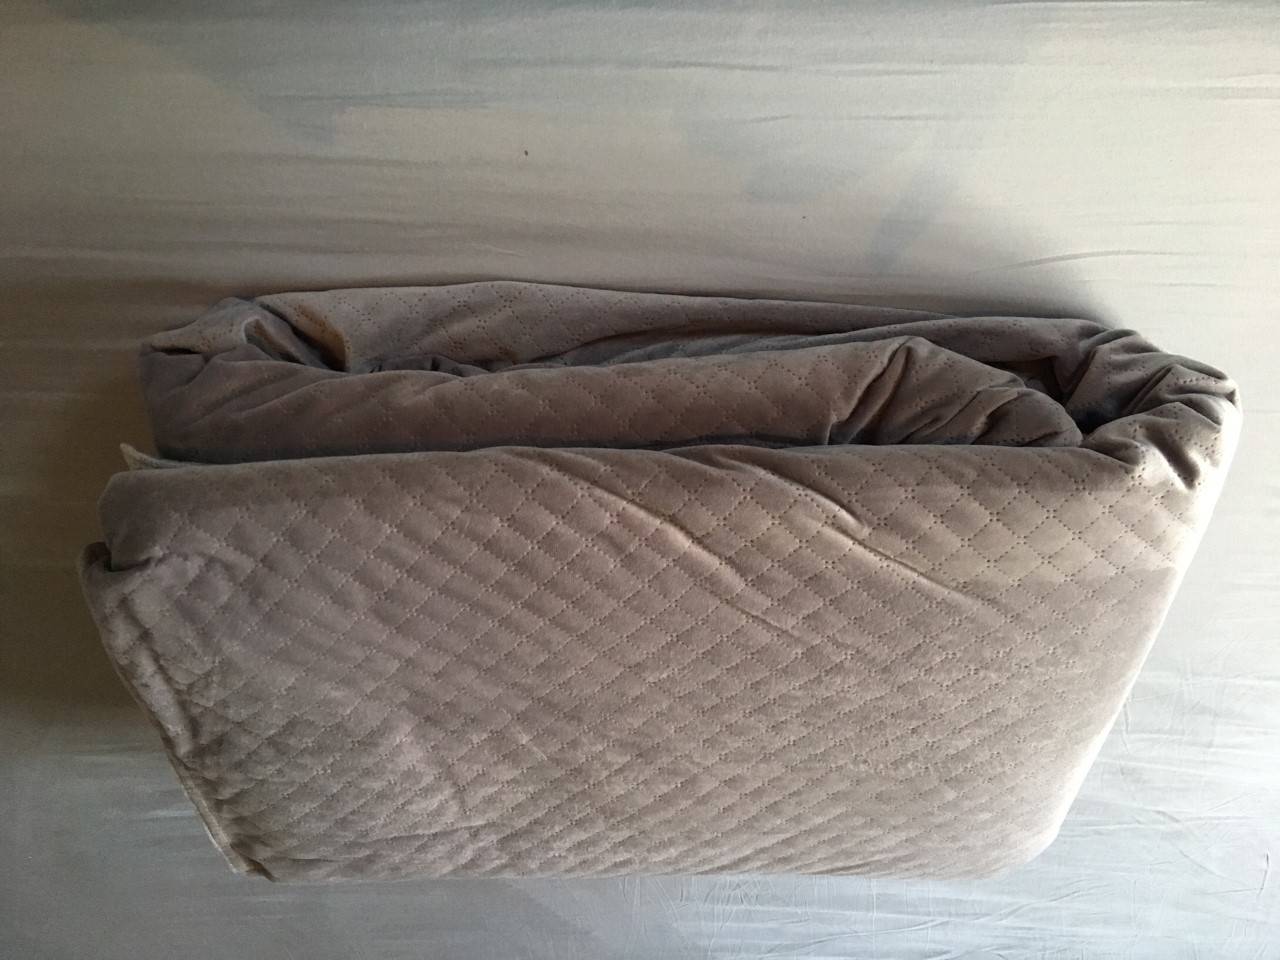 Nectar Quilted Weighted Blanket Review - The Sleep Judge